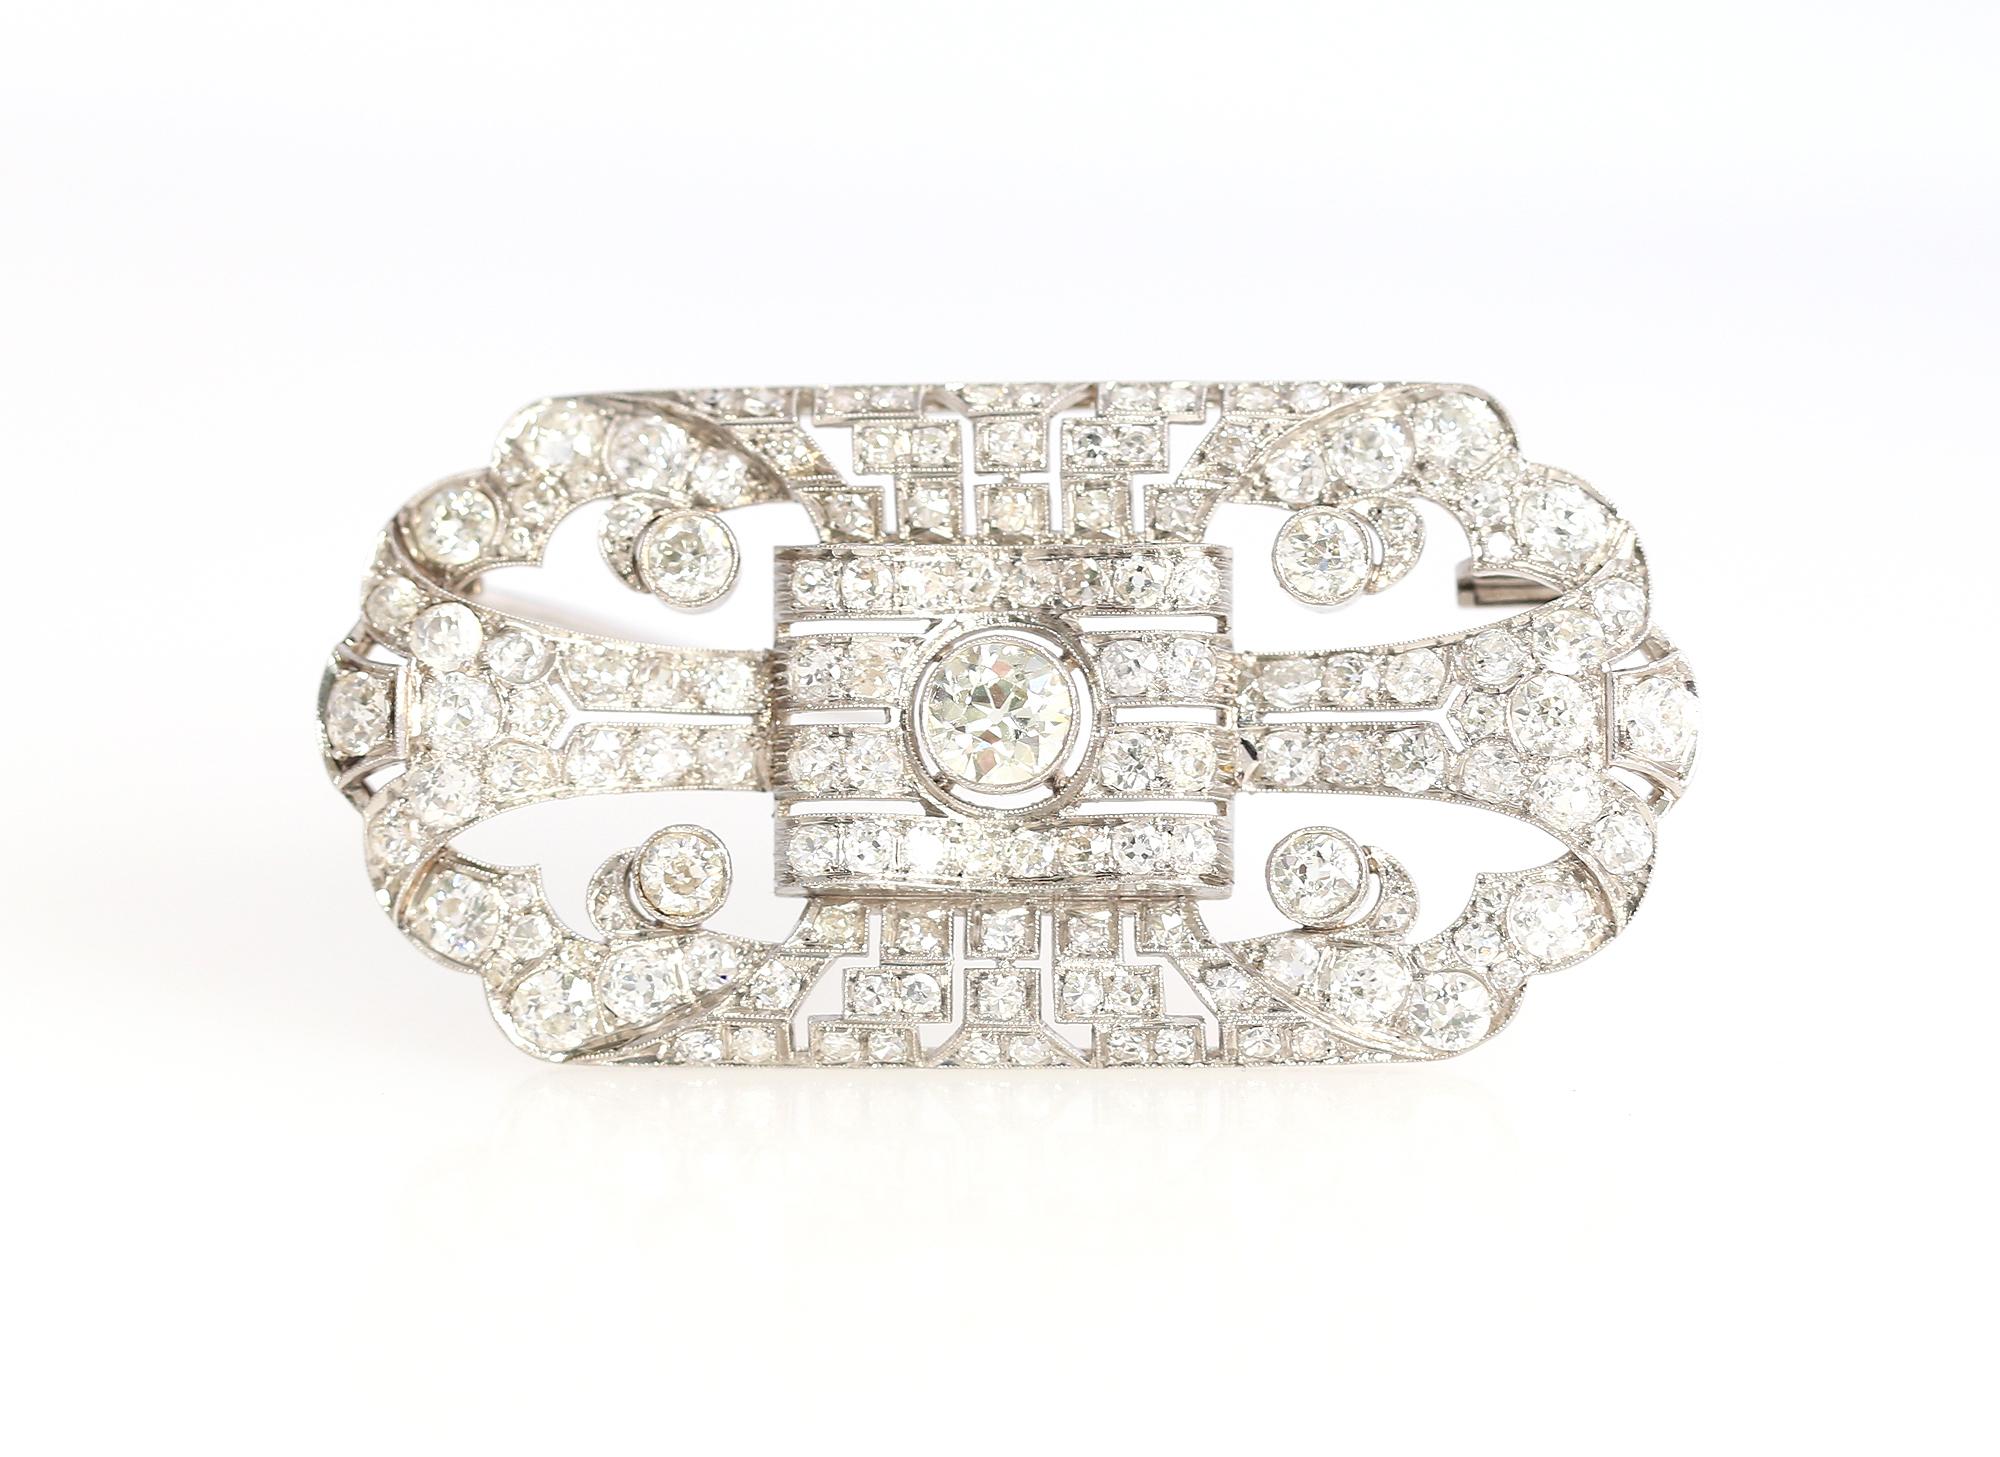 Fine Diamond brooch. Center Diamond weighing 1.5 Ct with a total approximate Diamond weight of 11.05 Ct. Amazing item and a perfect example of its time - the “roaring twenties”. Art Deco style.

Once it was common to communicate a message via pin or